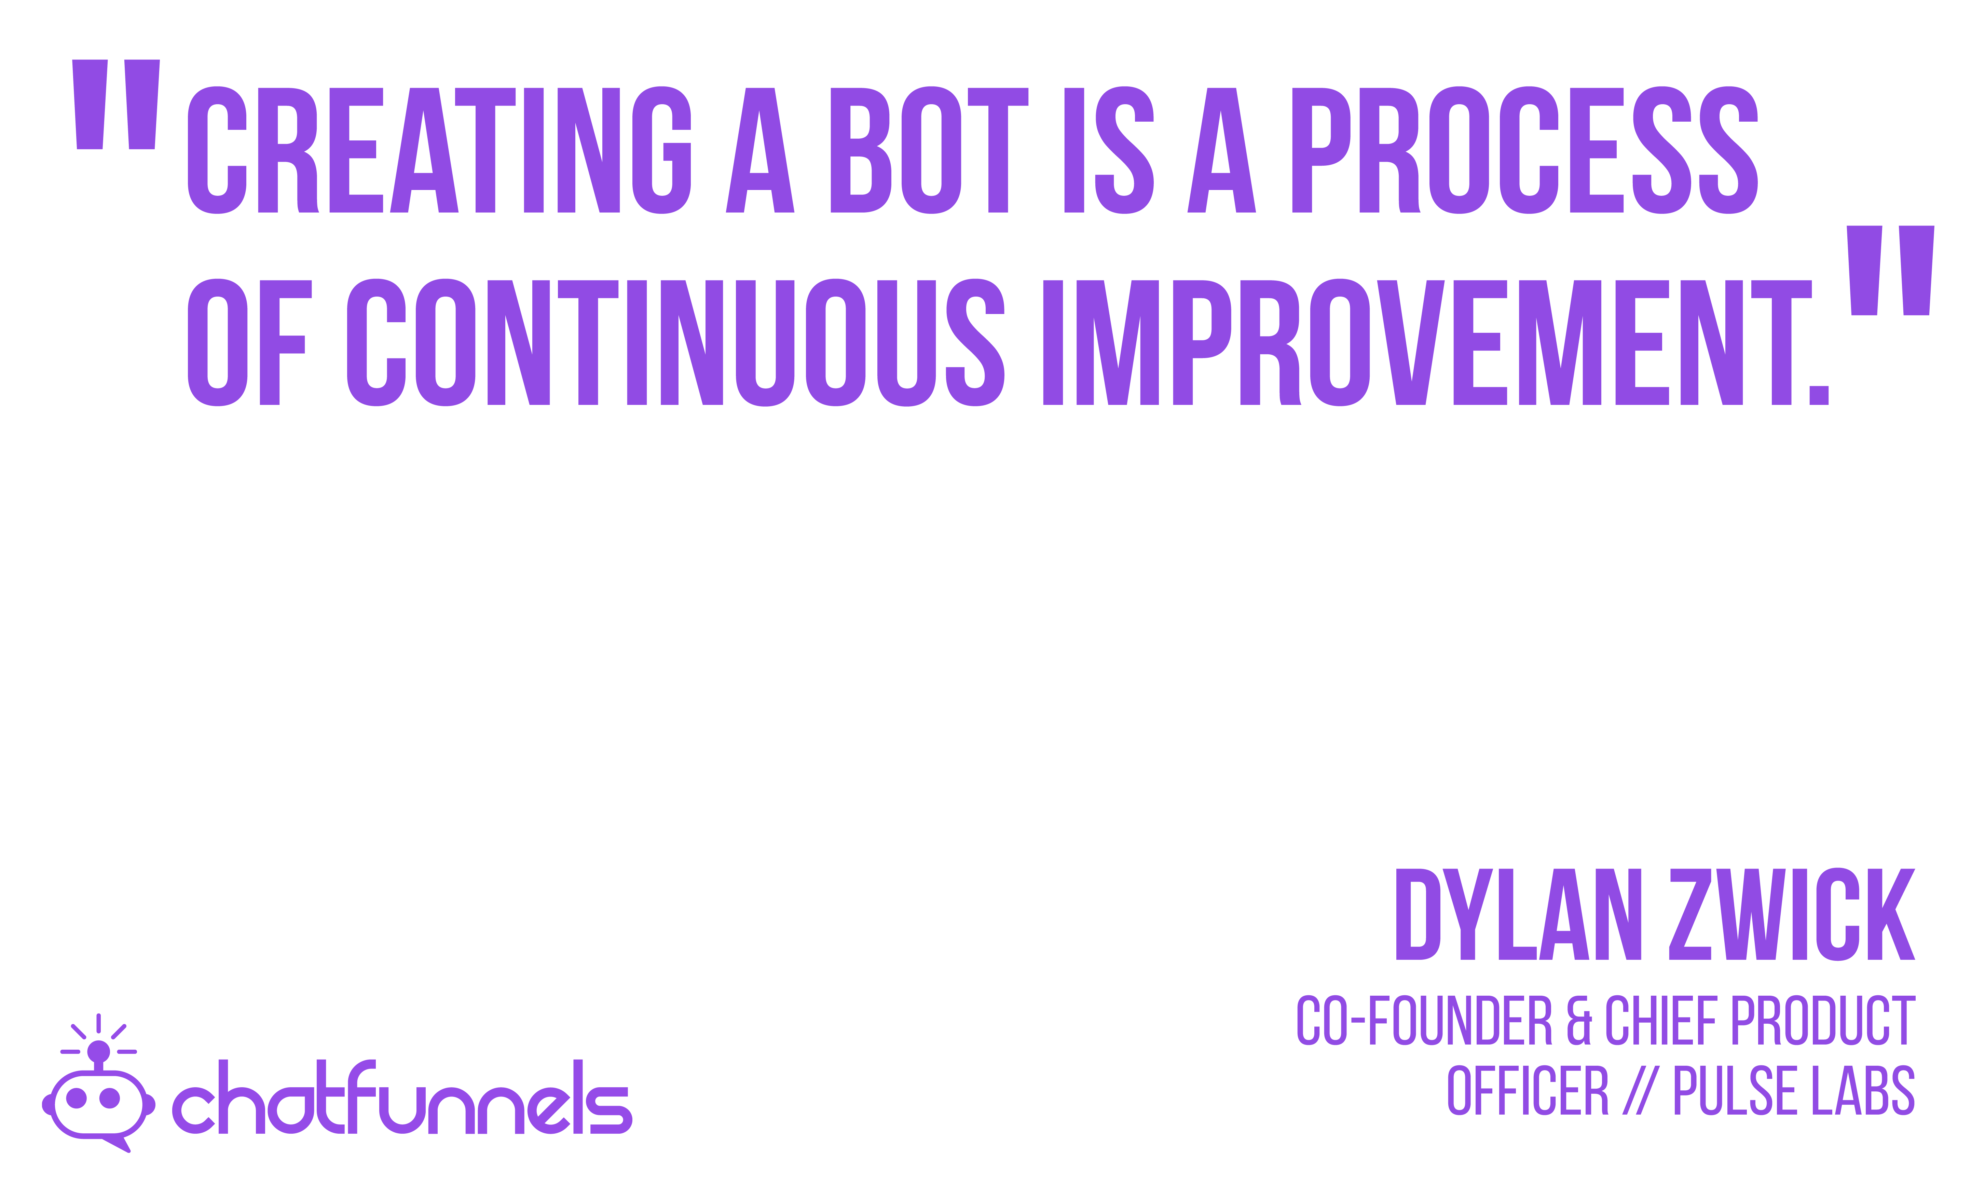 Creating a bot is a process of continuous testing